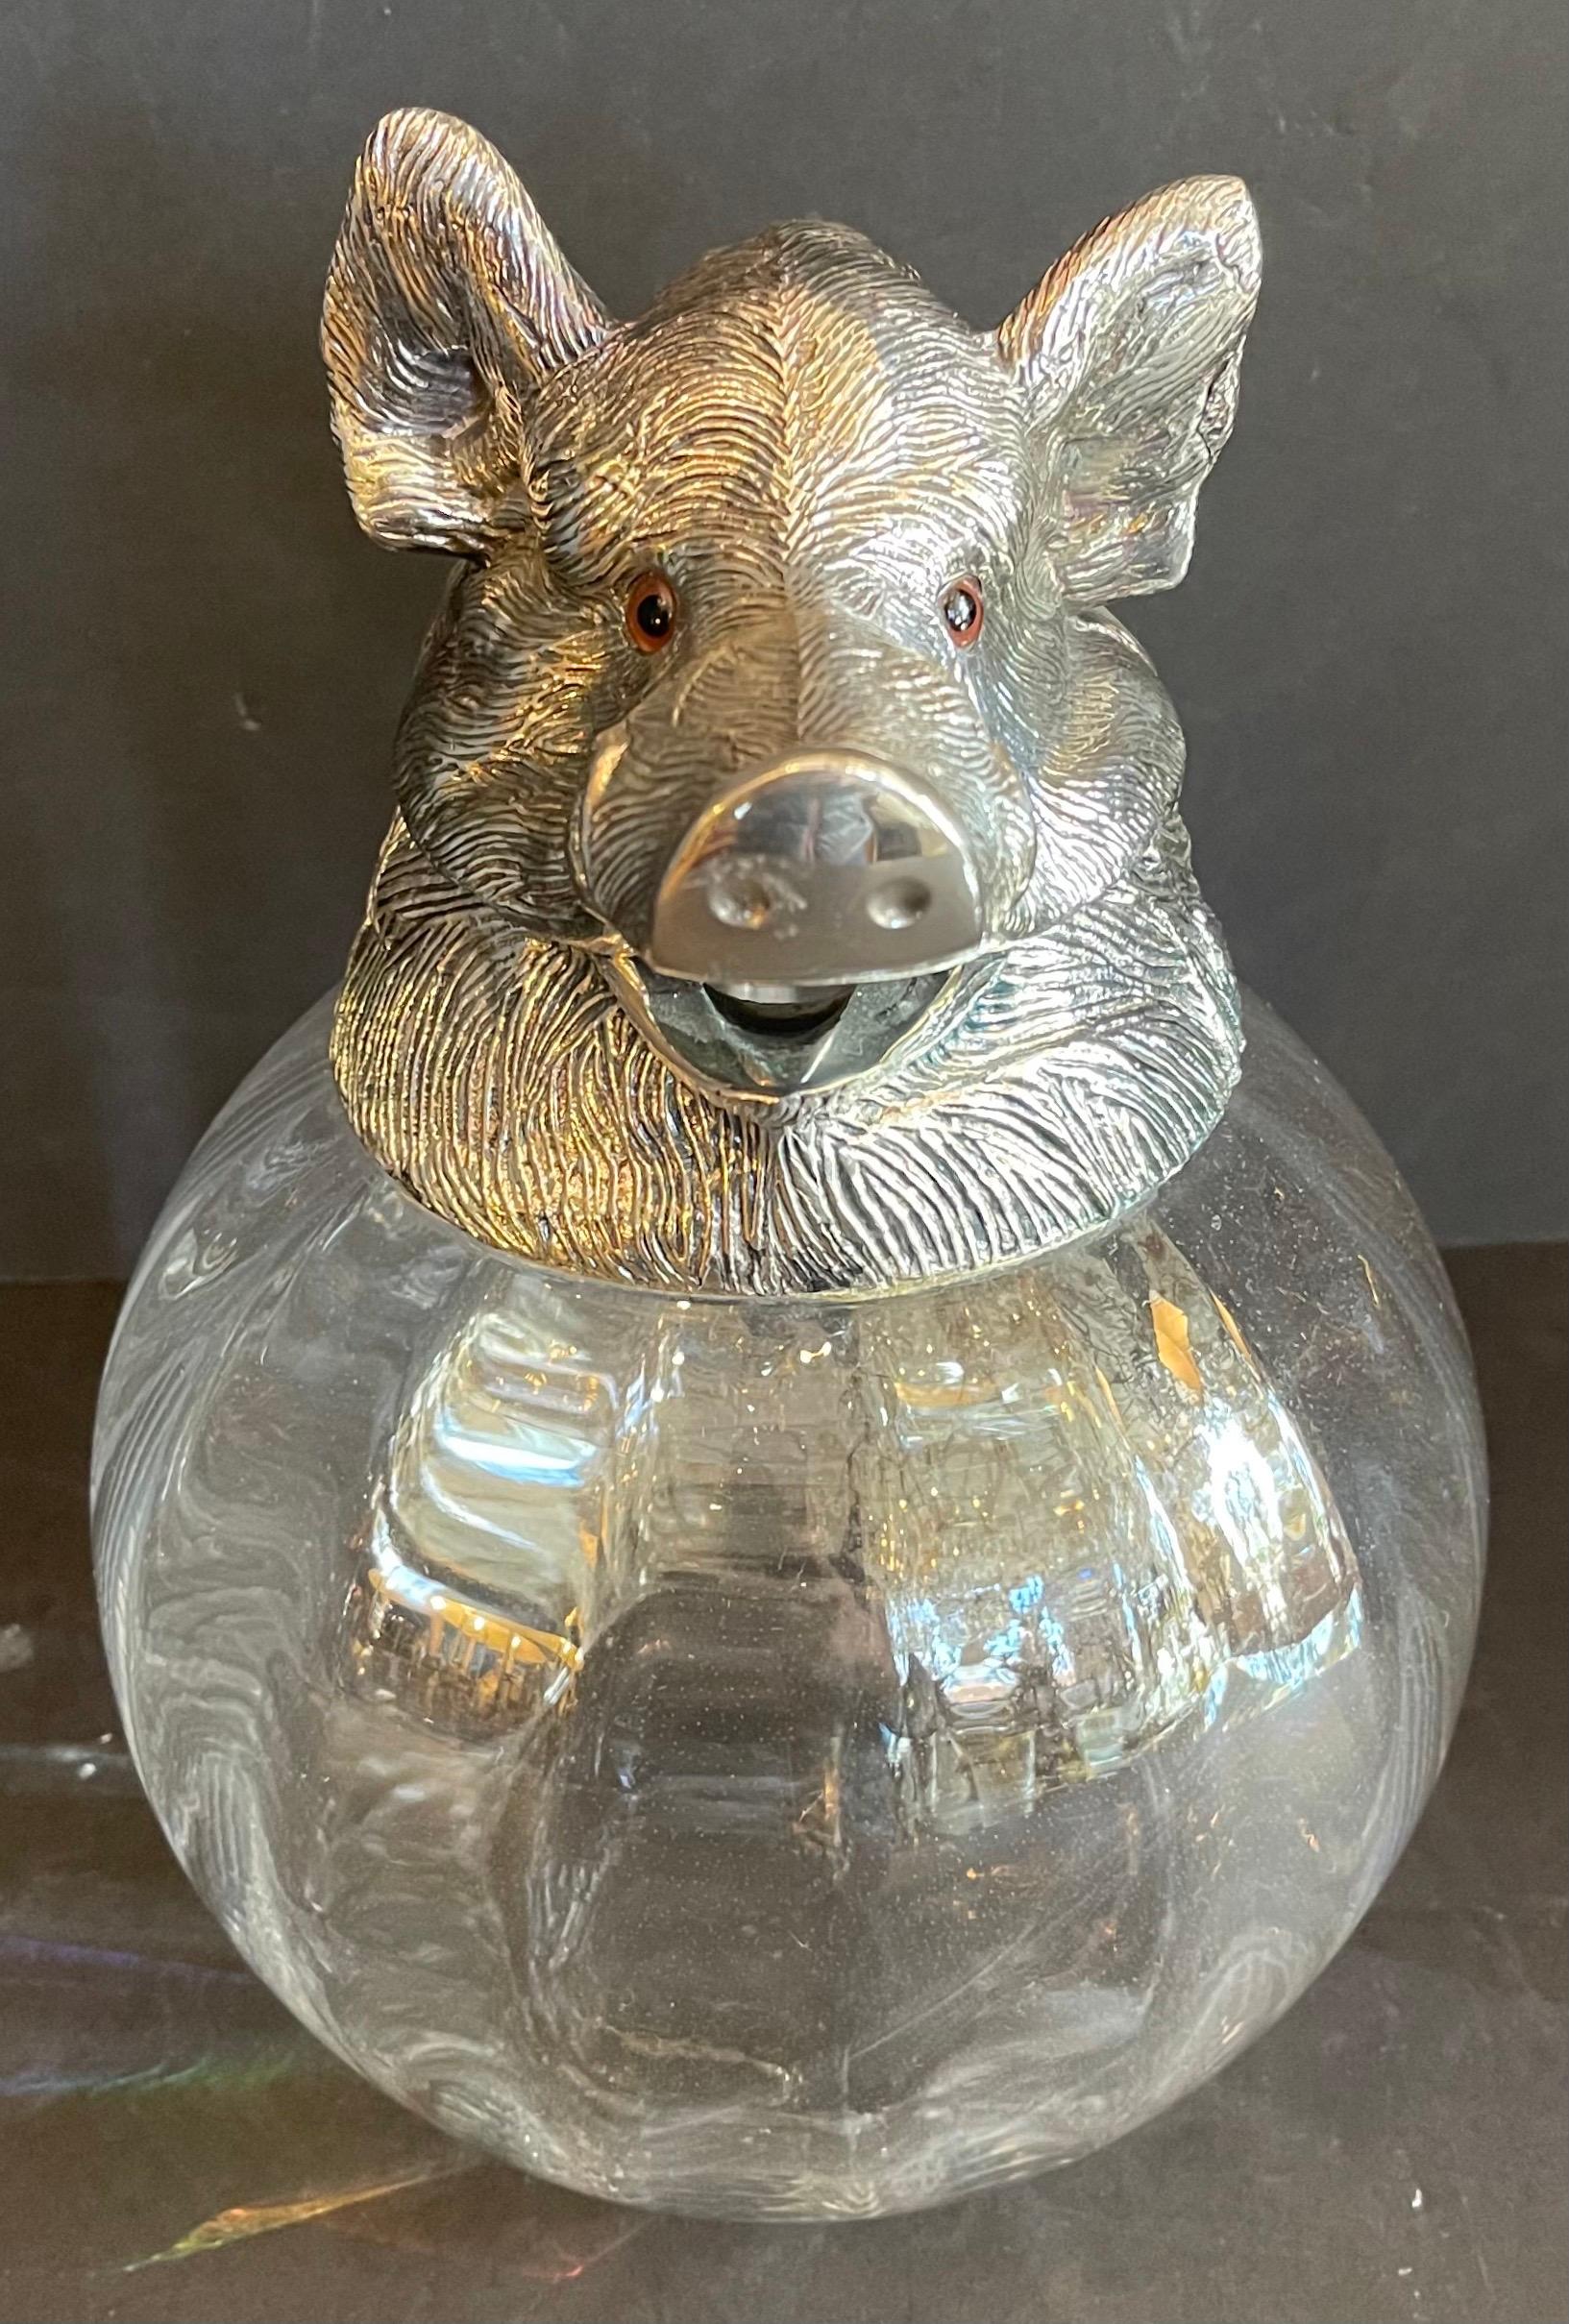 A wonderful wild boar silver plated carafe, lidded decanter, pitcher, by Valenti Made In Spain. 
The very large and impressive boar’s head is very finely crafted in silver plate, the glass appears to have been hand blown. This superbly crafted